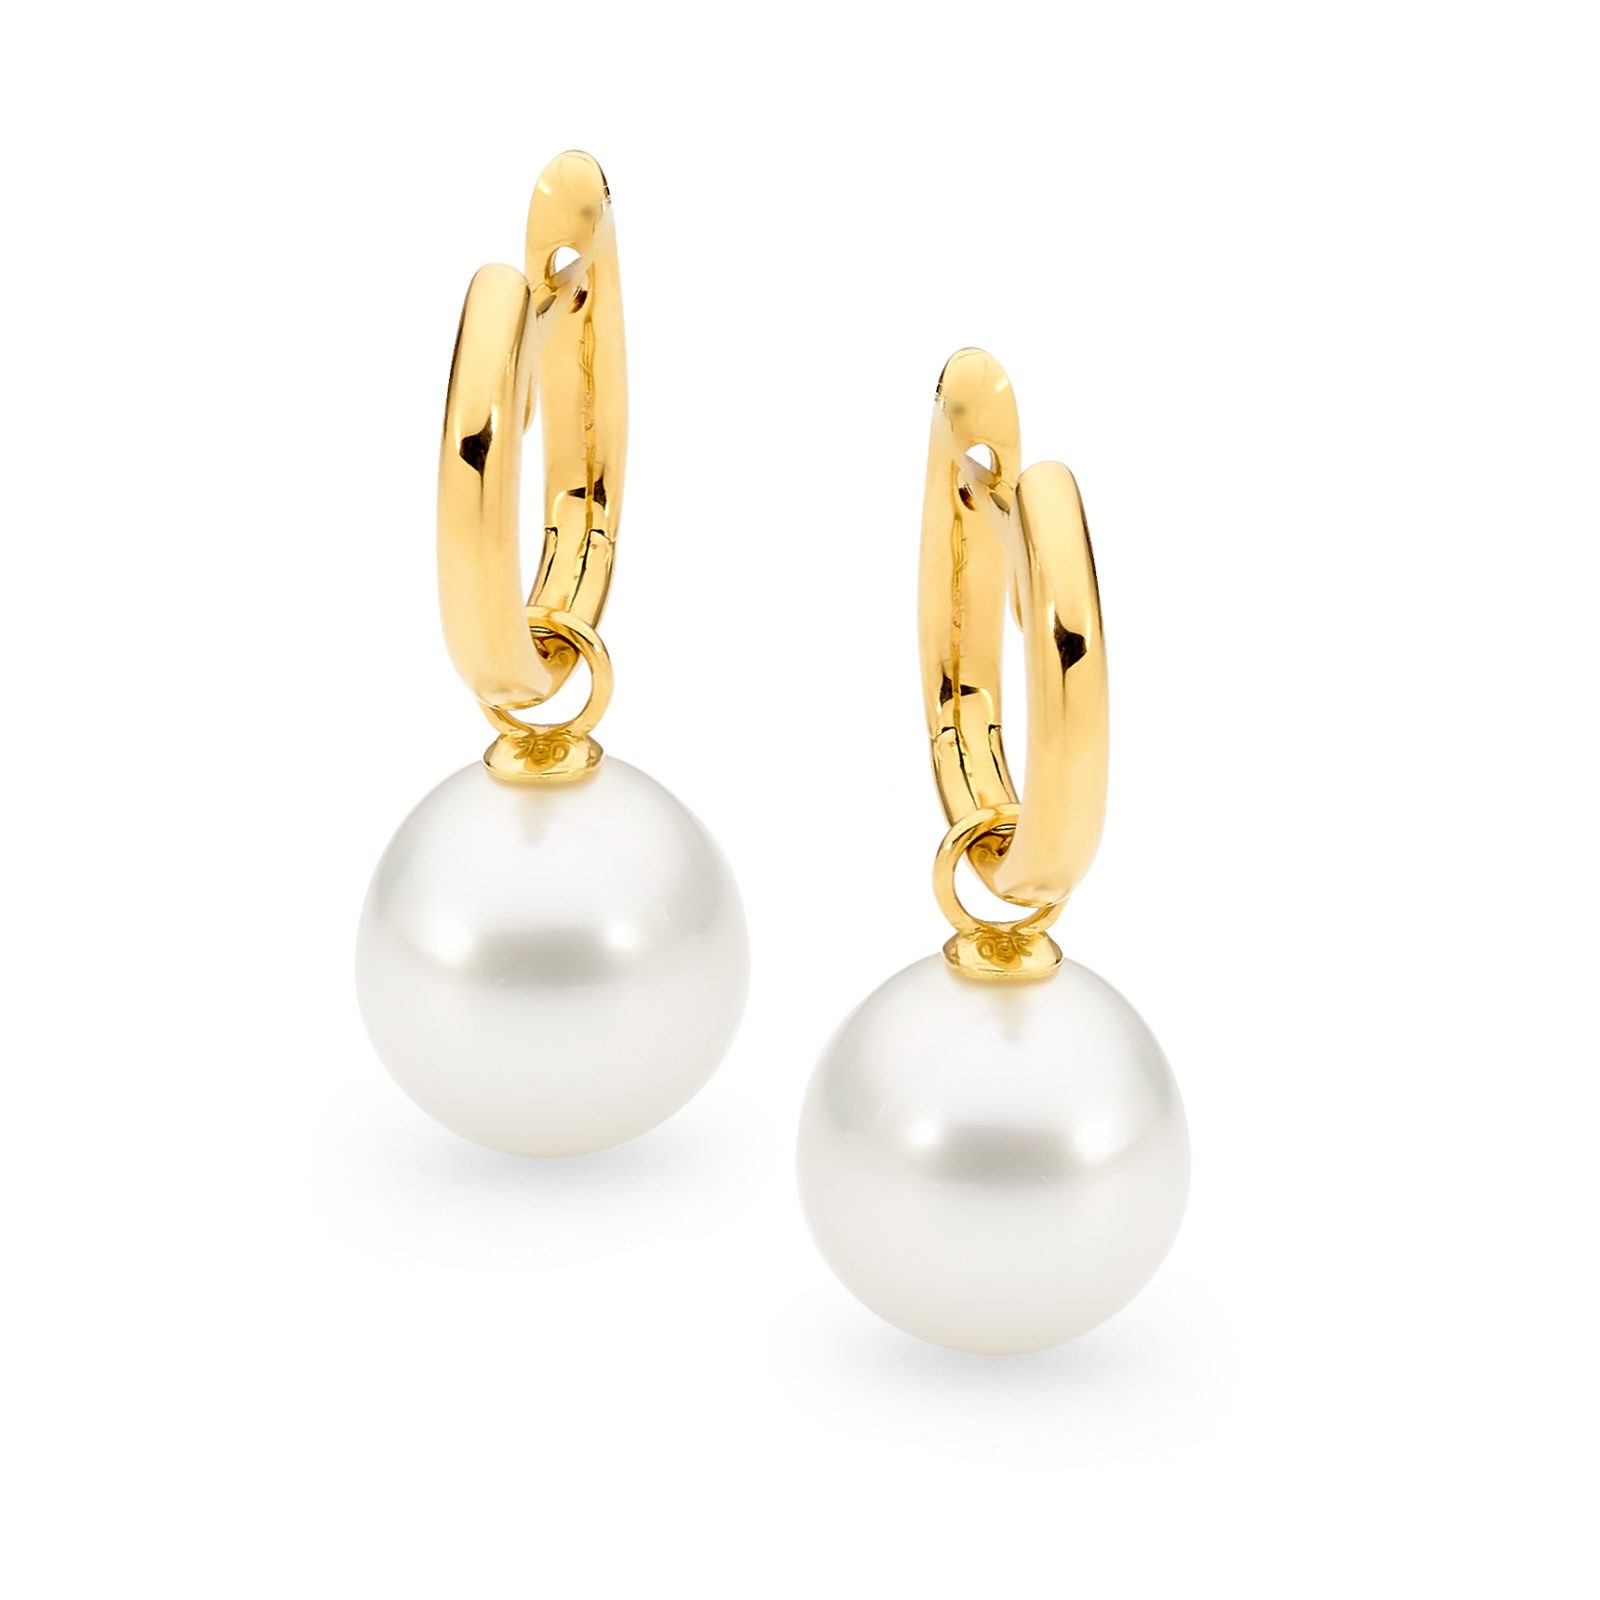 Aggregate 99+ about pearl earrings australia cool - NEC